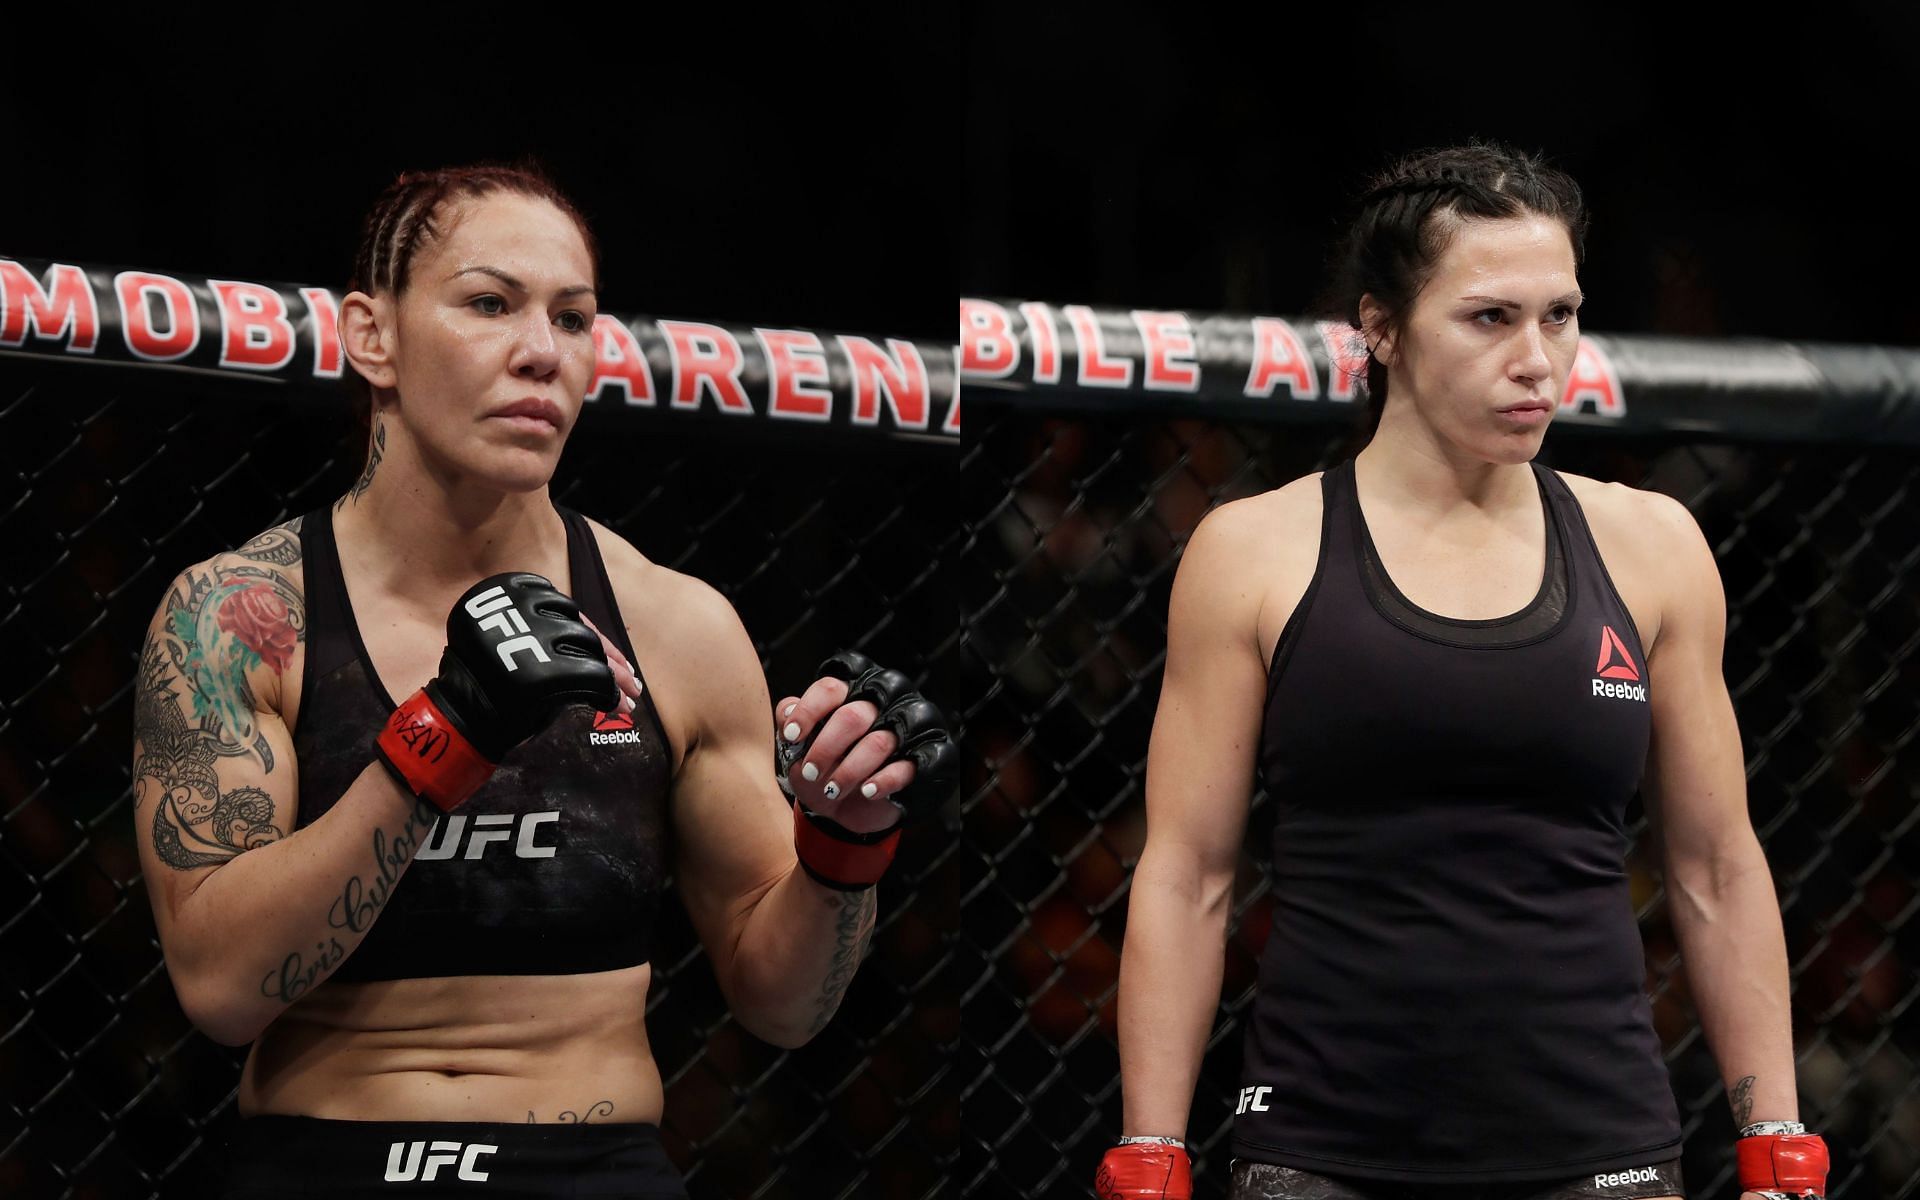 Cris Cyborg (left) and Cat Zingano (right). [via Getty Images]